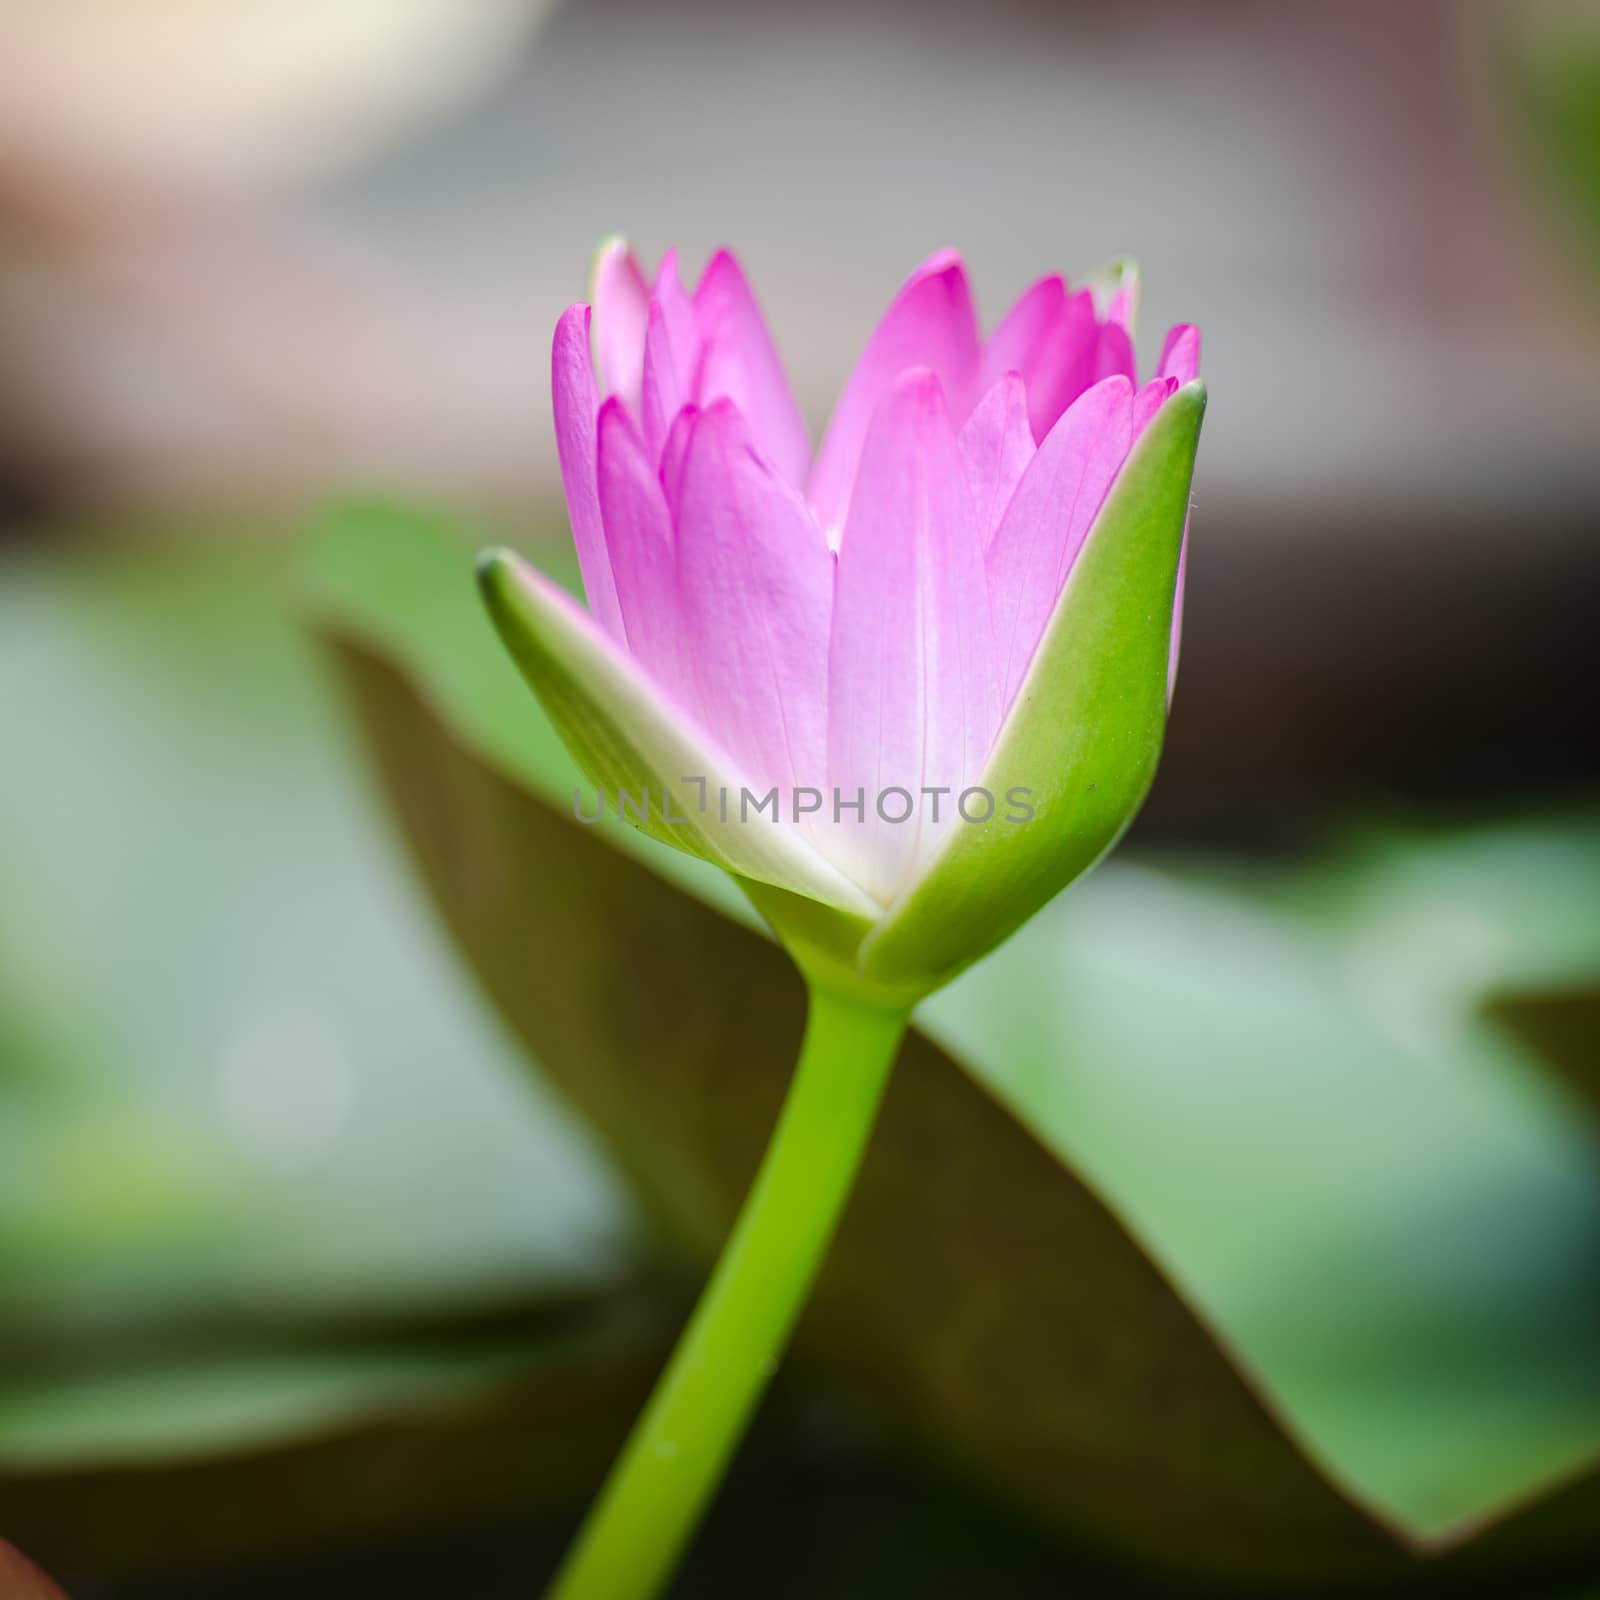 purple water lily by hinnamsaisuy